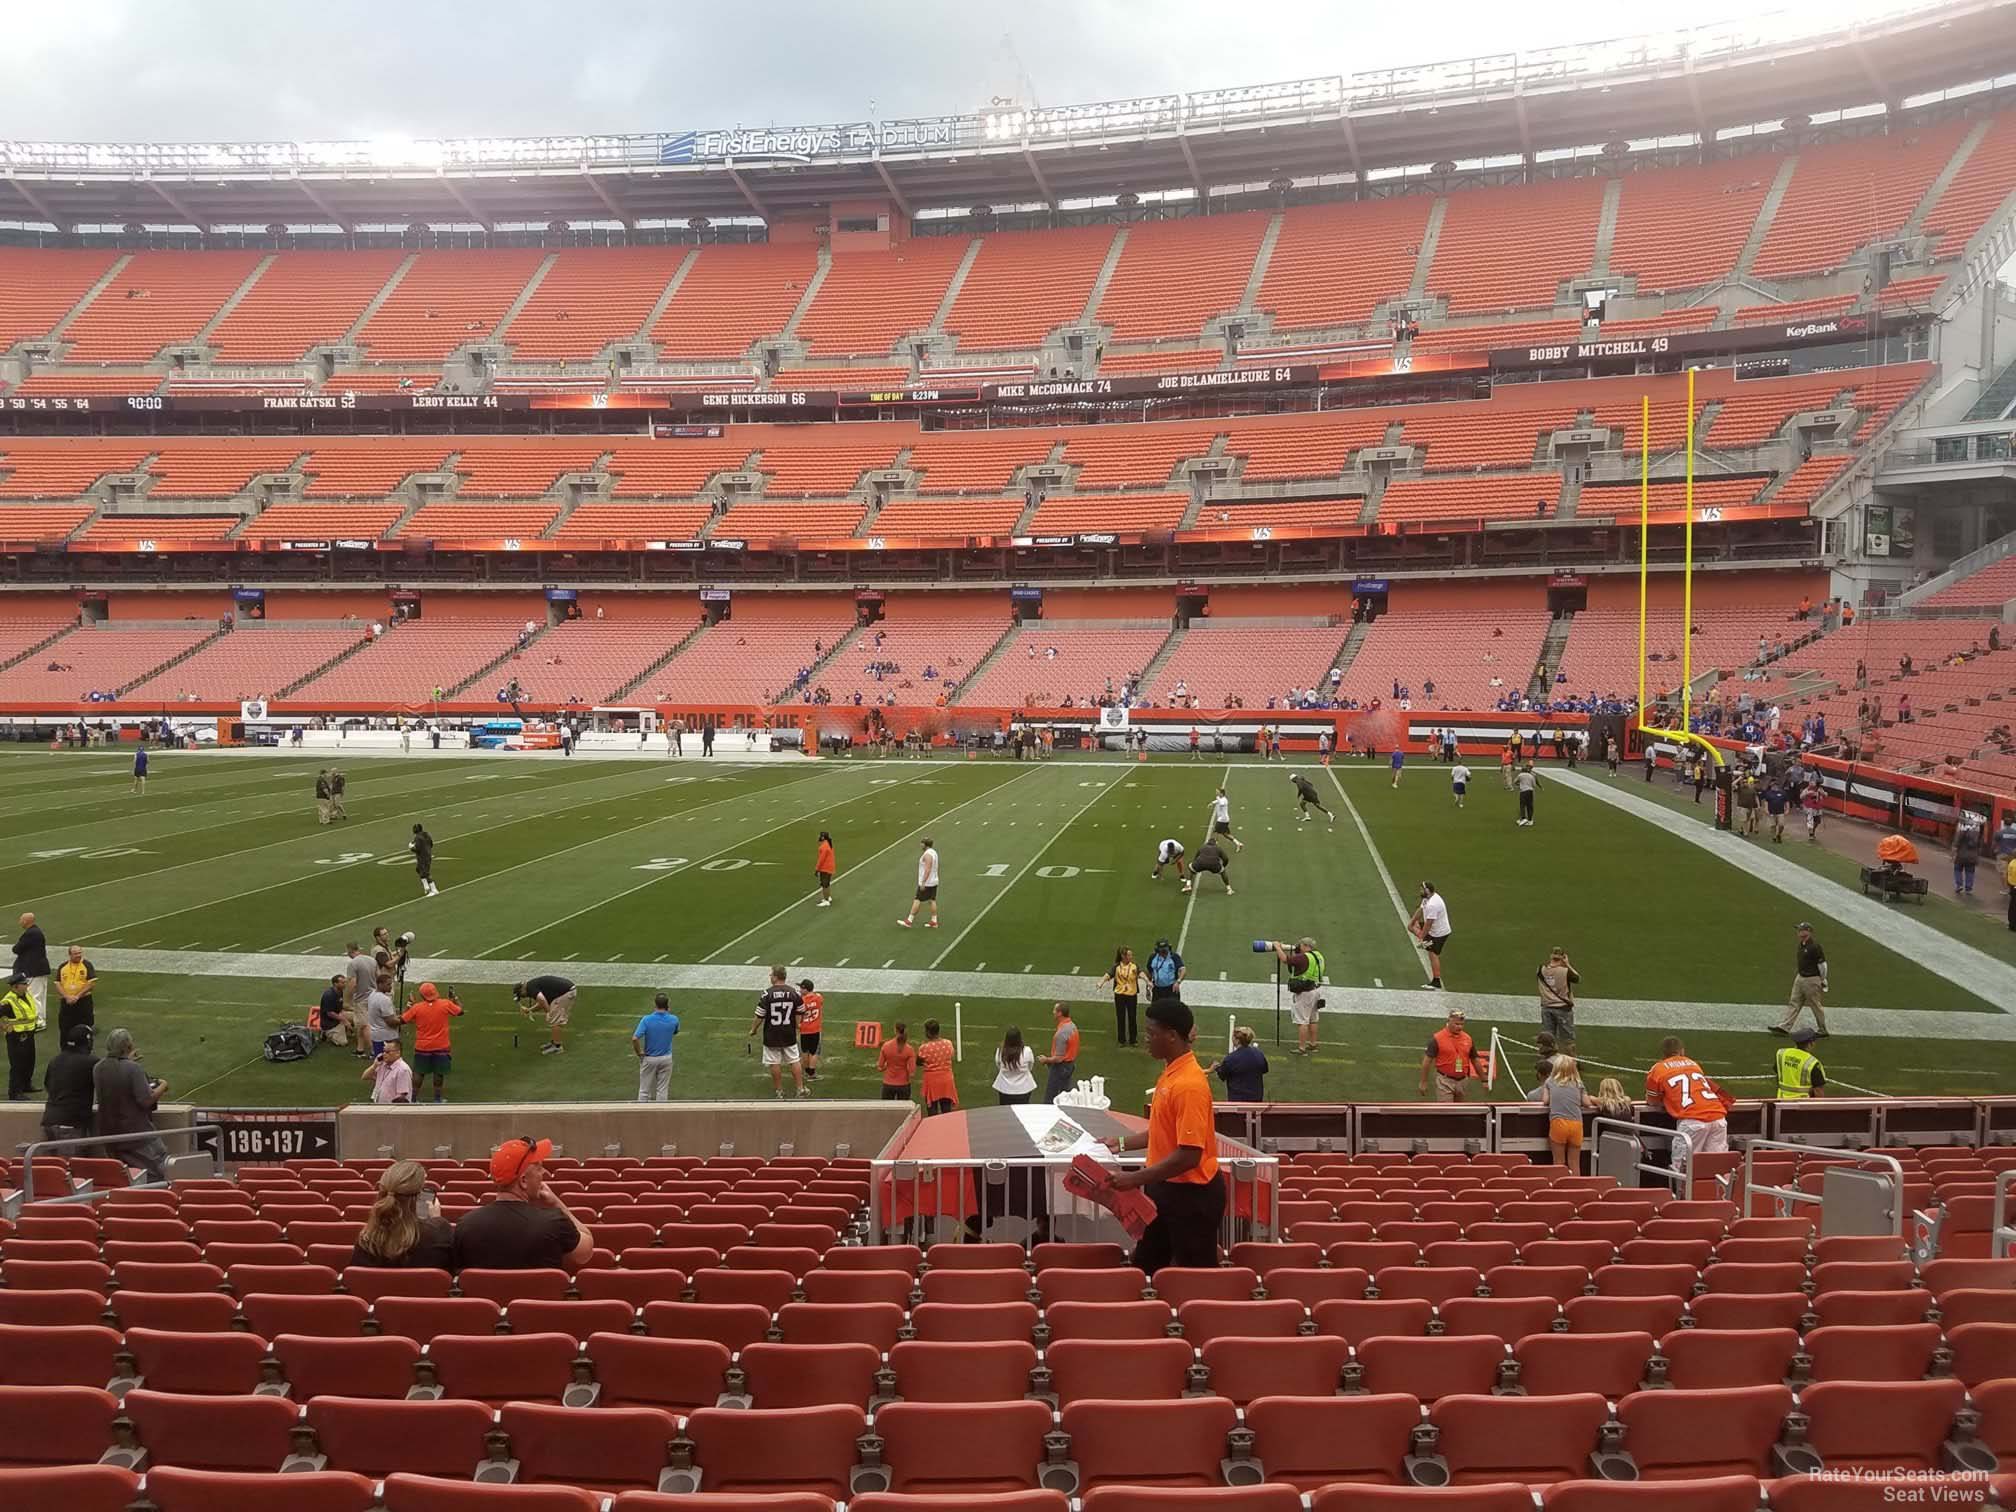 section 137, row 17 seat view  - cleveland browns stadium